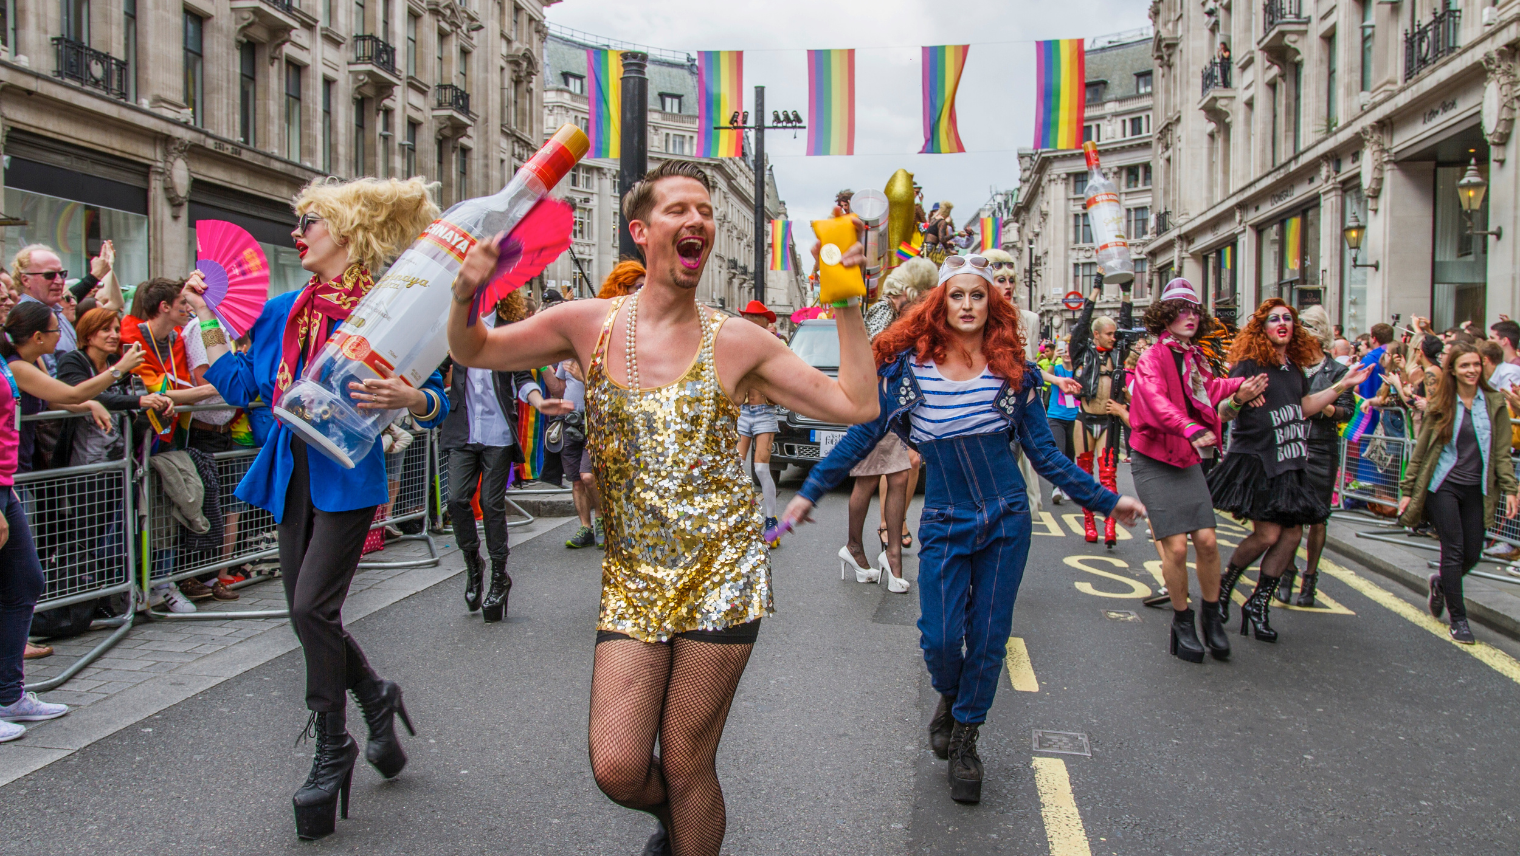 Image of a large crowd at a Pride event marching the streets in colourful clothing